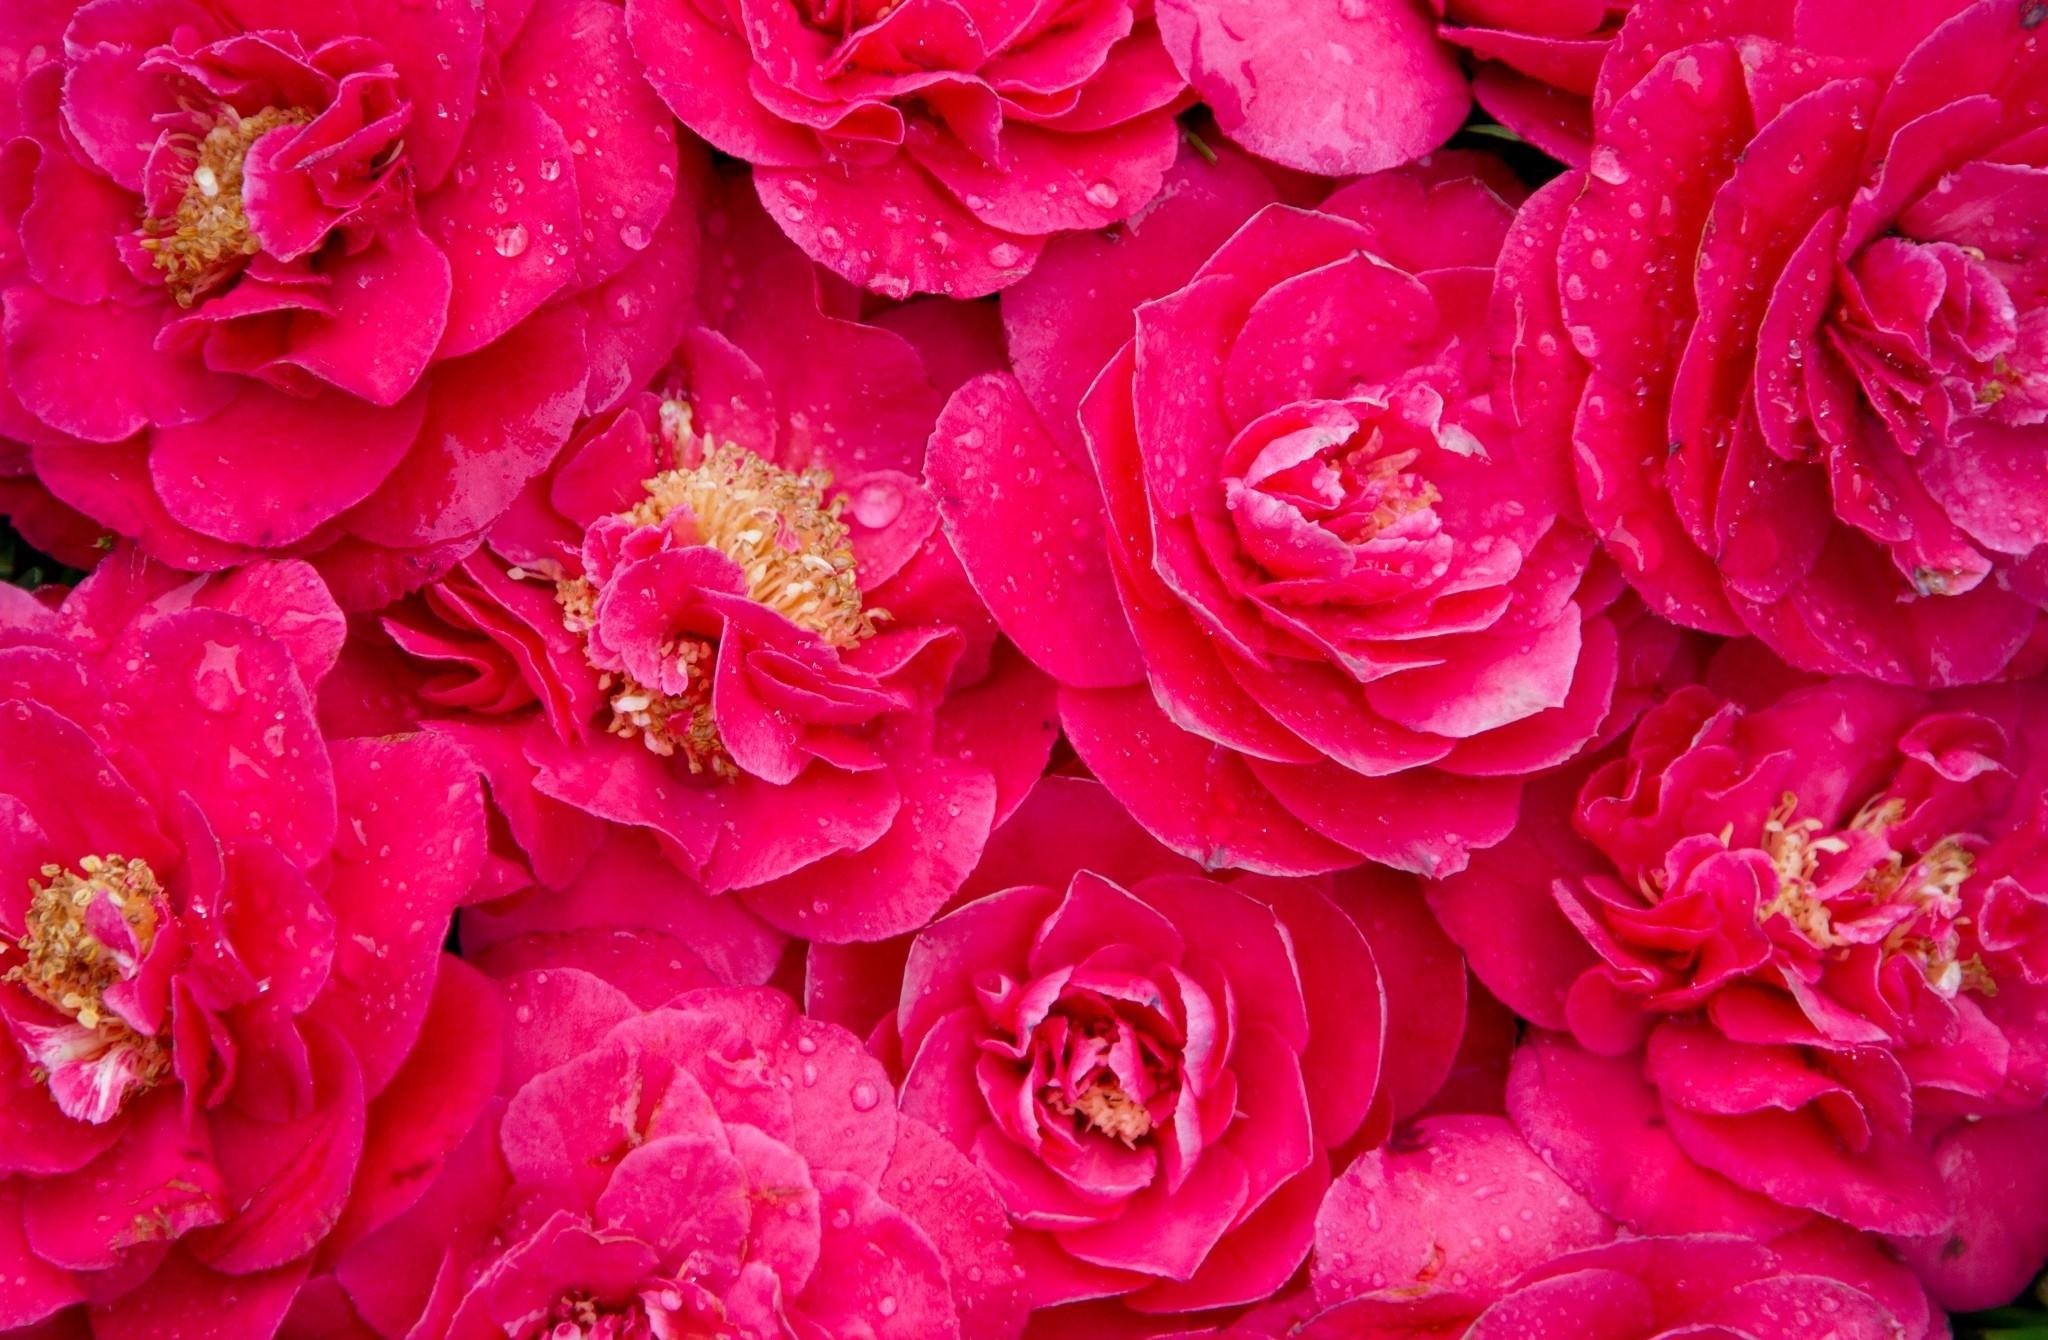 drops, flowers, pink, freshness, lot, camellia